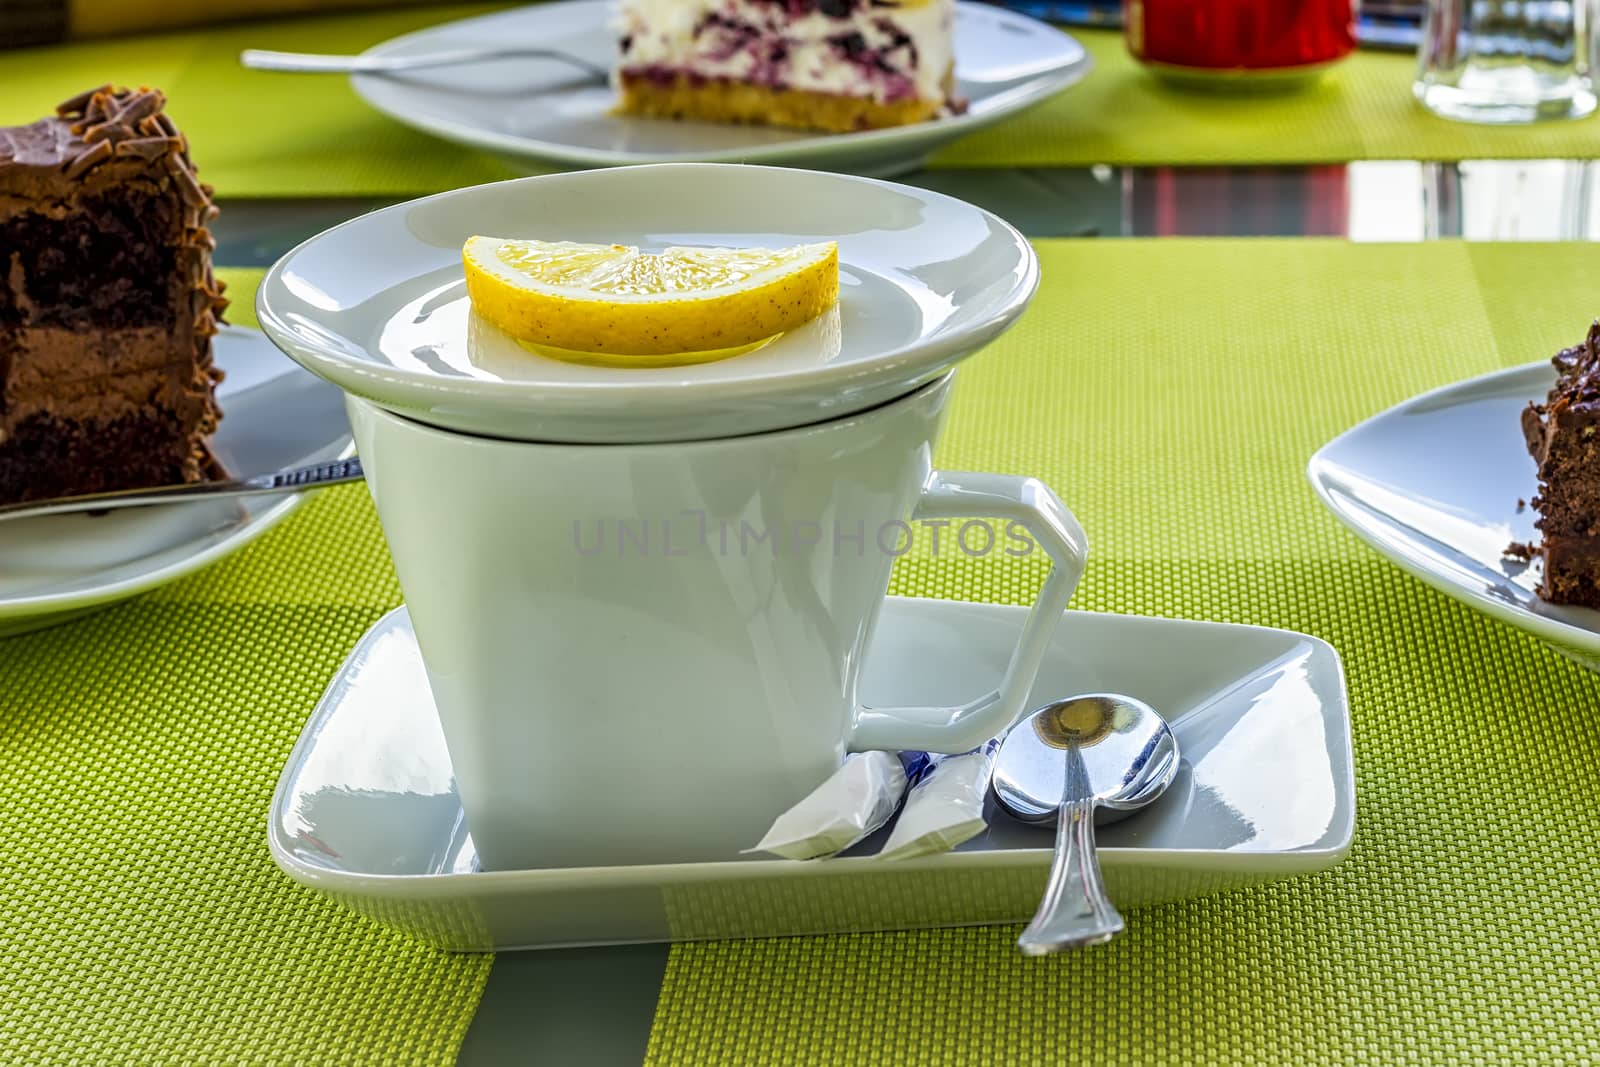 White porcelain cup of tea with lemon, sugar, spoon on a table in the cafeteria.